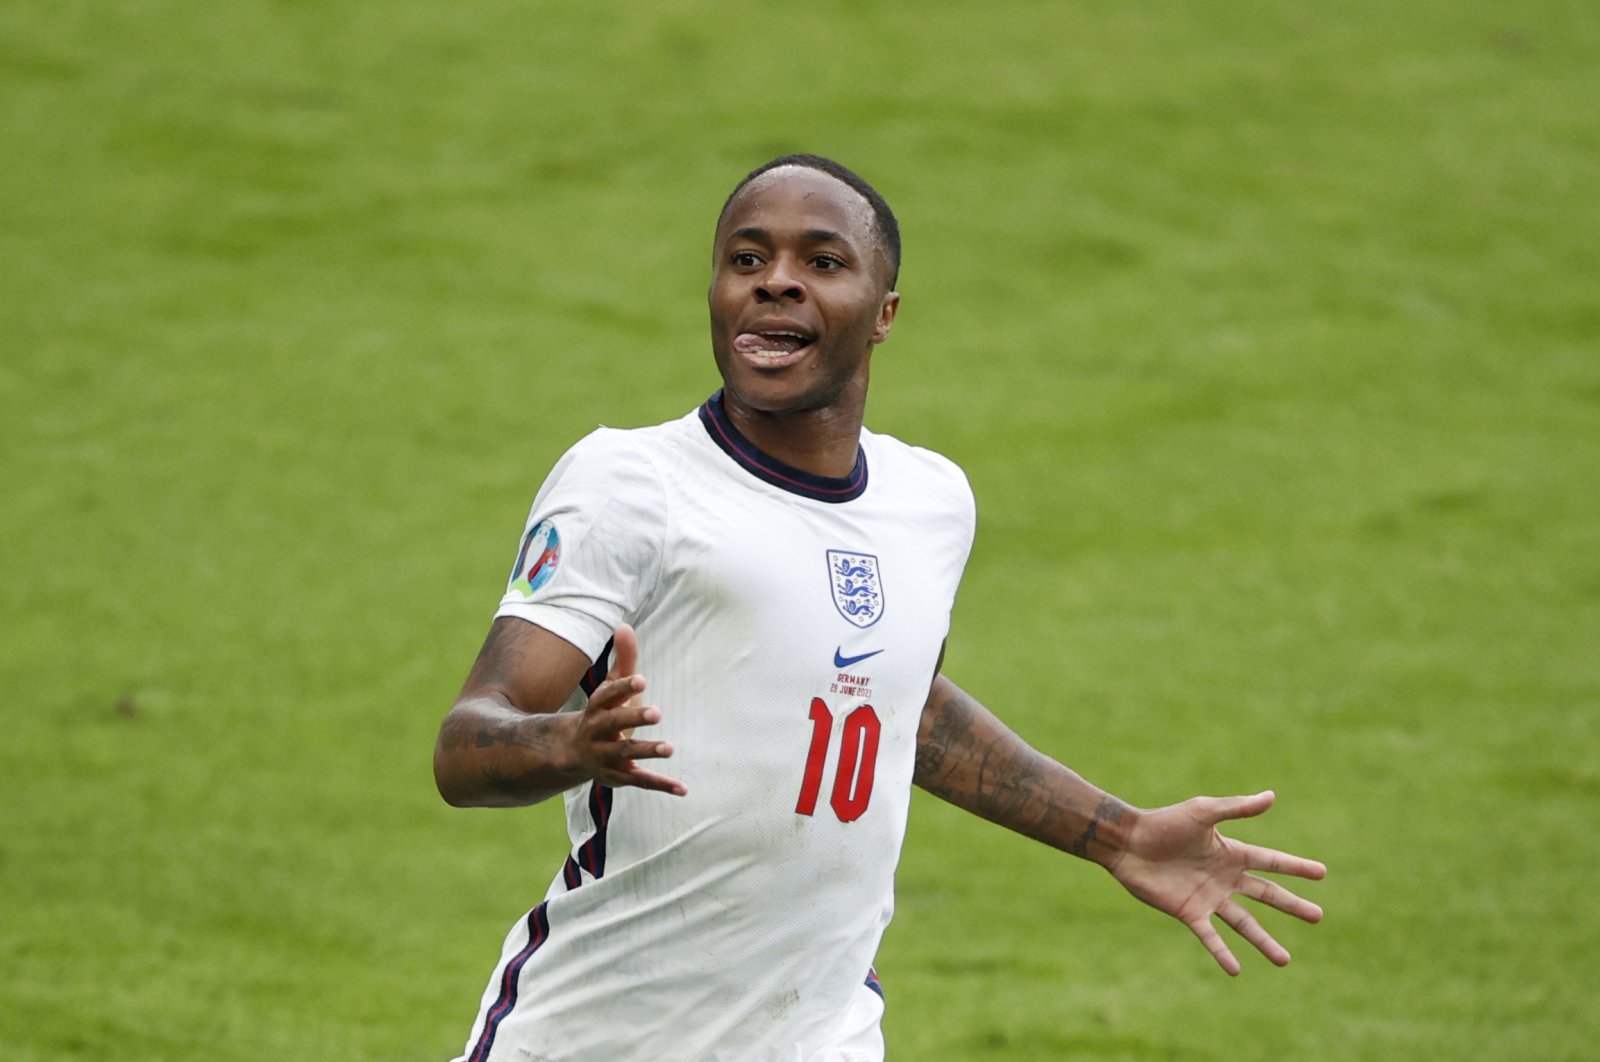 England's Raheem Sterling celebrates scoring his side's opening goal during the Euro 2020 round of 16 match against Germany at Wembley stadium in London, England, June 29, 2021. (AP Photo)